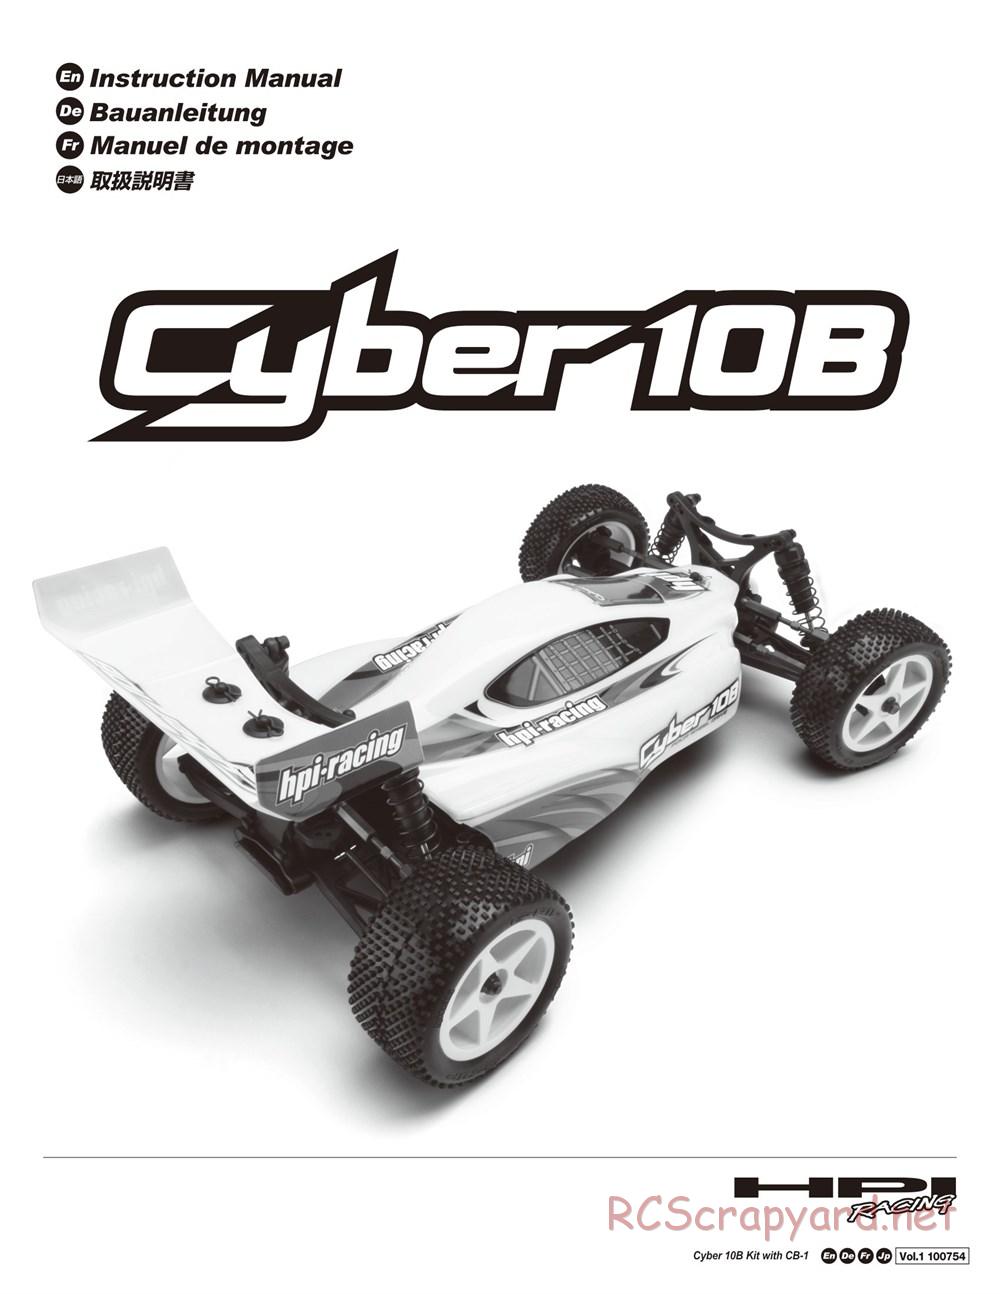 HPI - Cyber 10B - Manual - Page 1